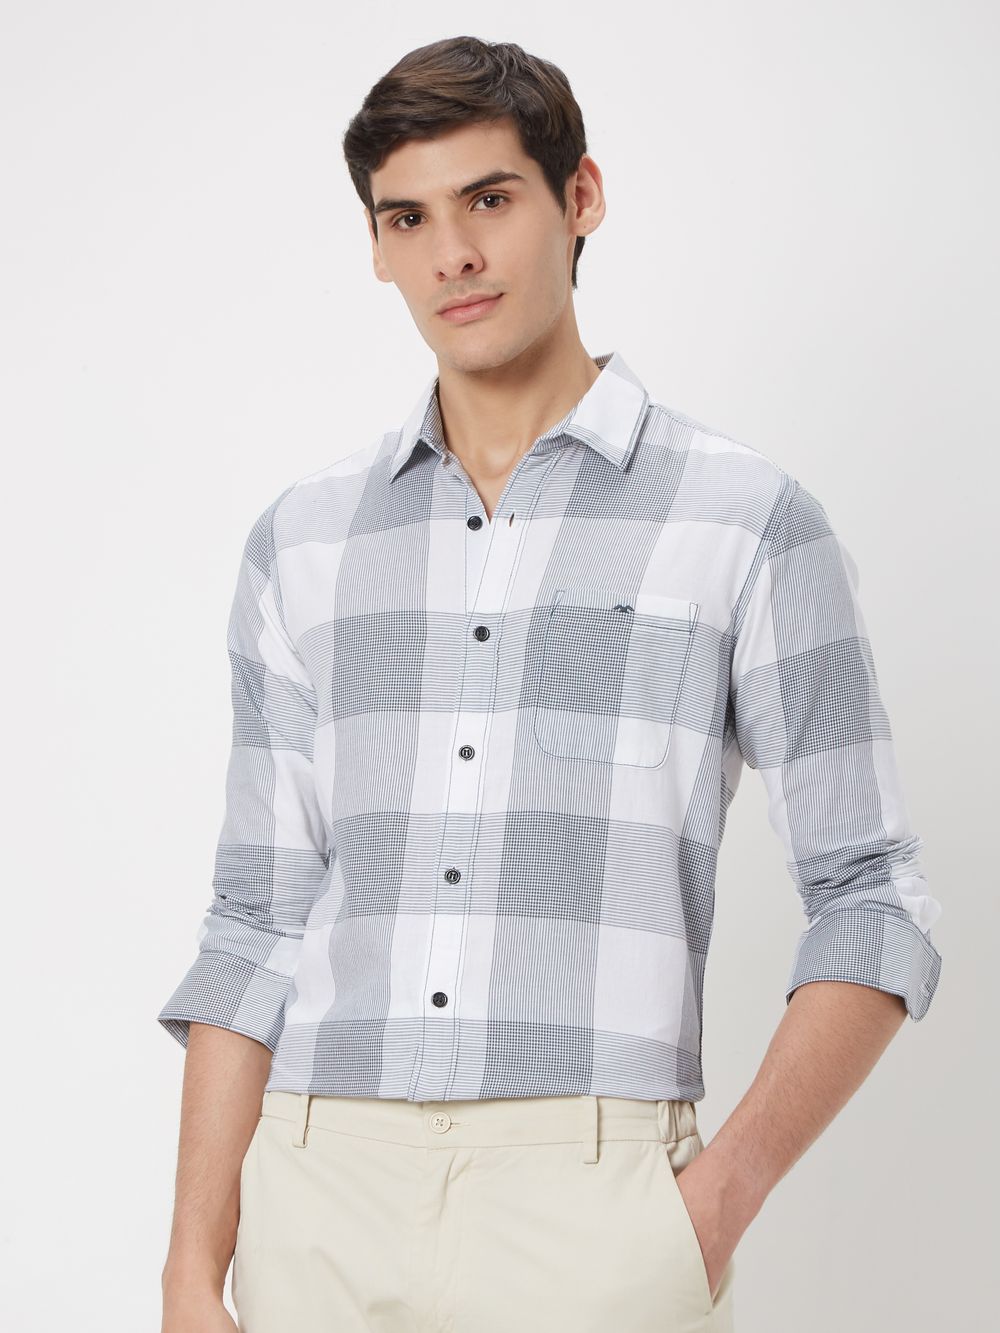 White & Grey Large Check Slim Fit Casual Shirt